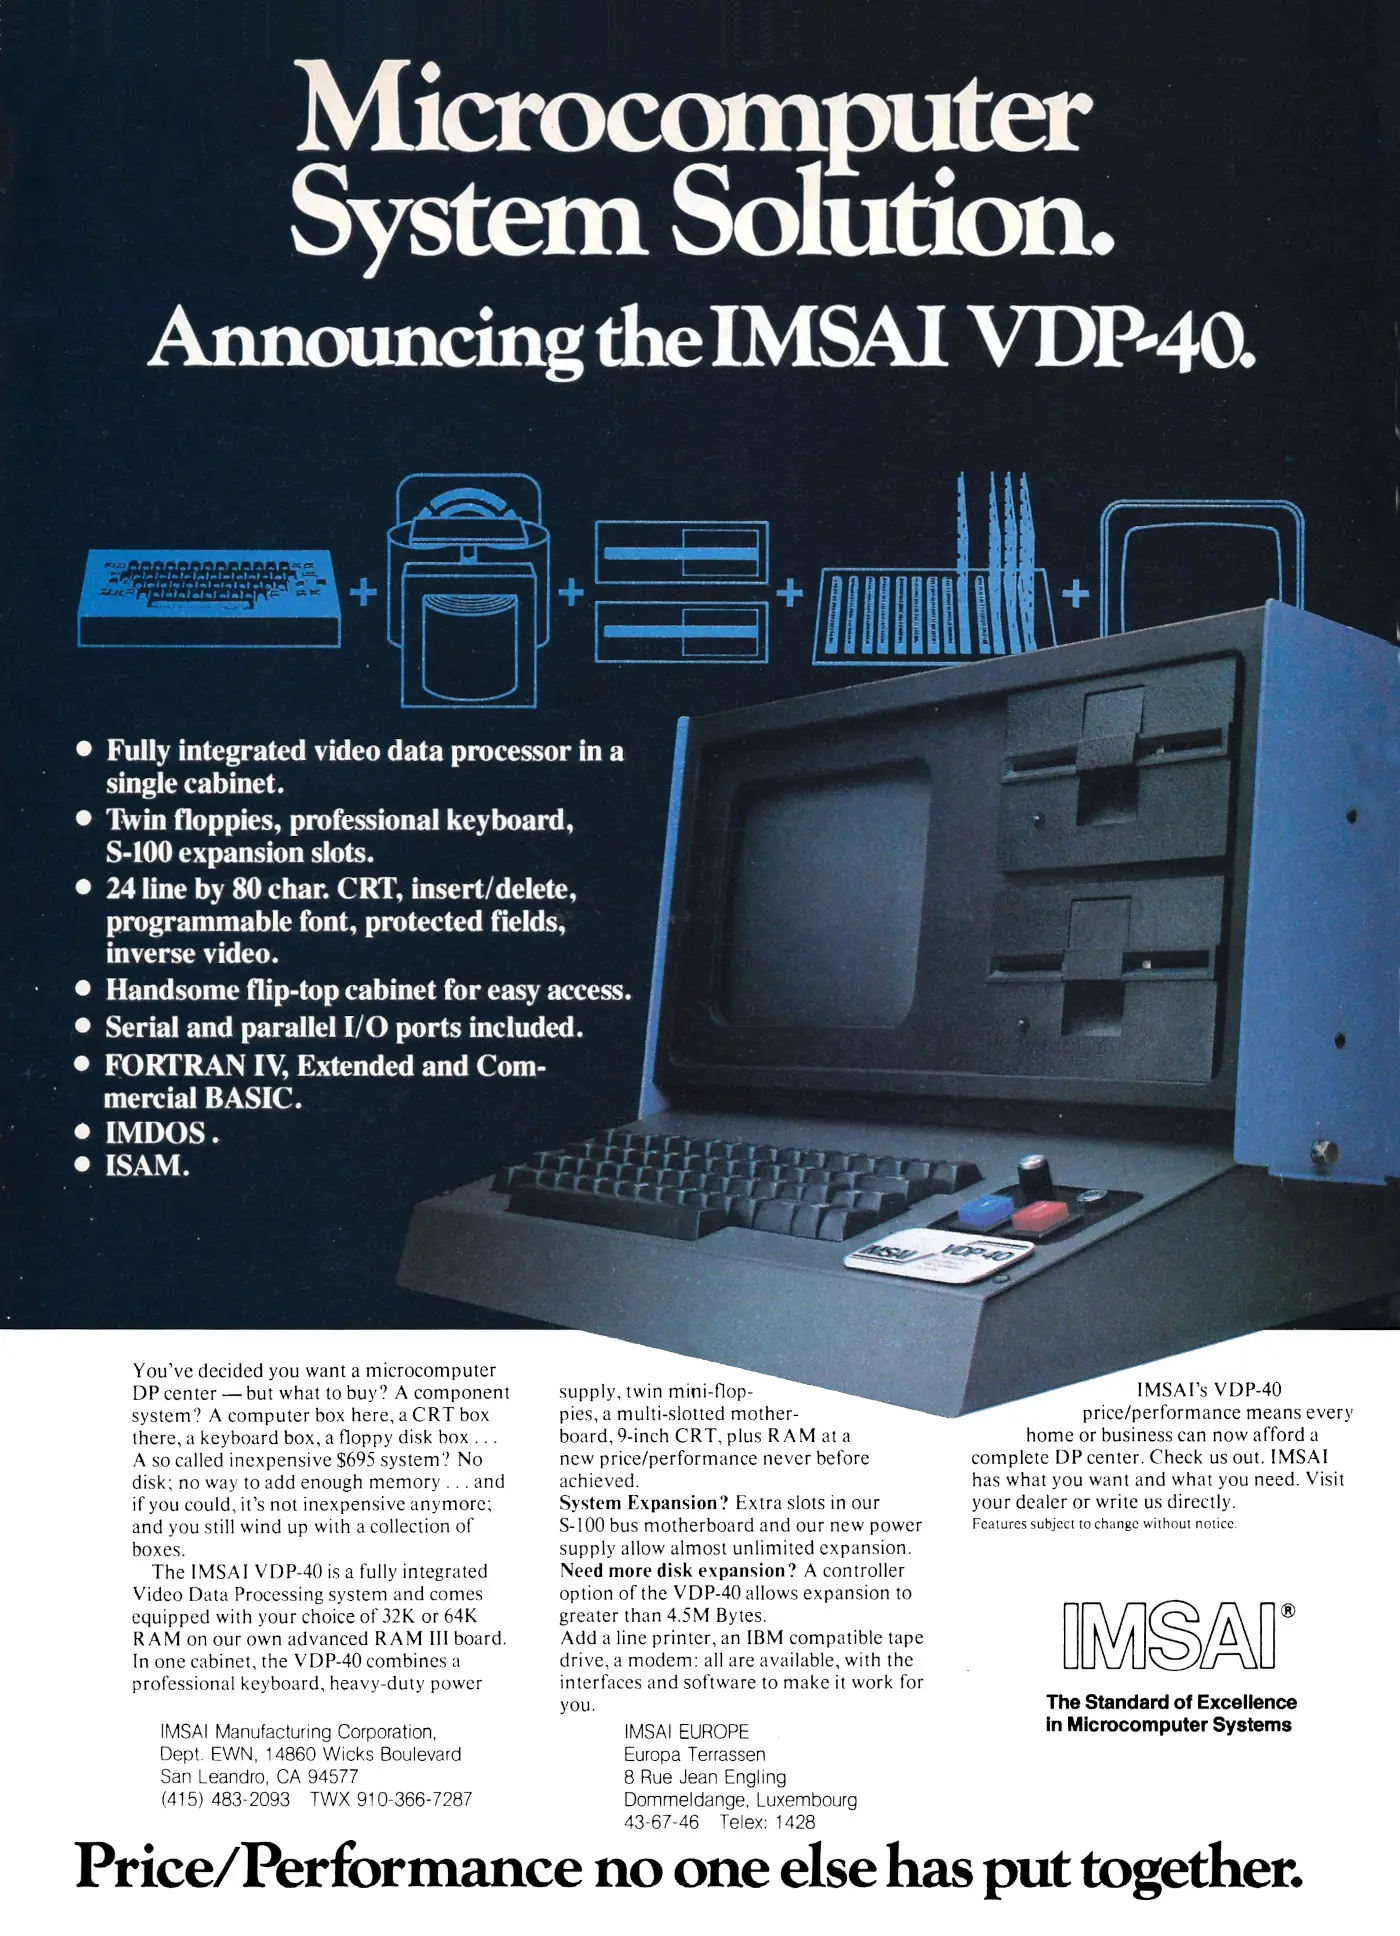 Altos Advert: Announcing the IMSAI VDP-40 - Microcomputer System Solution, from Byte - The Small Systems Journal, August 1978